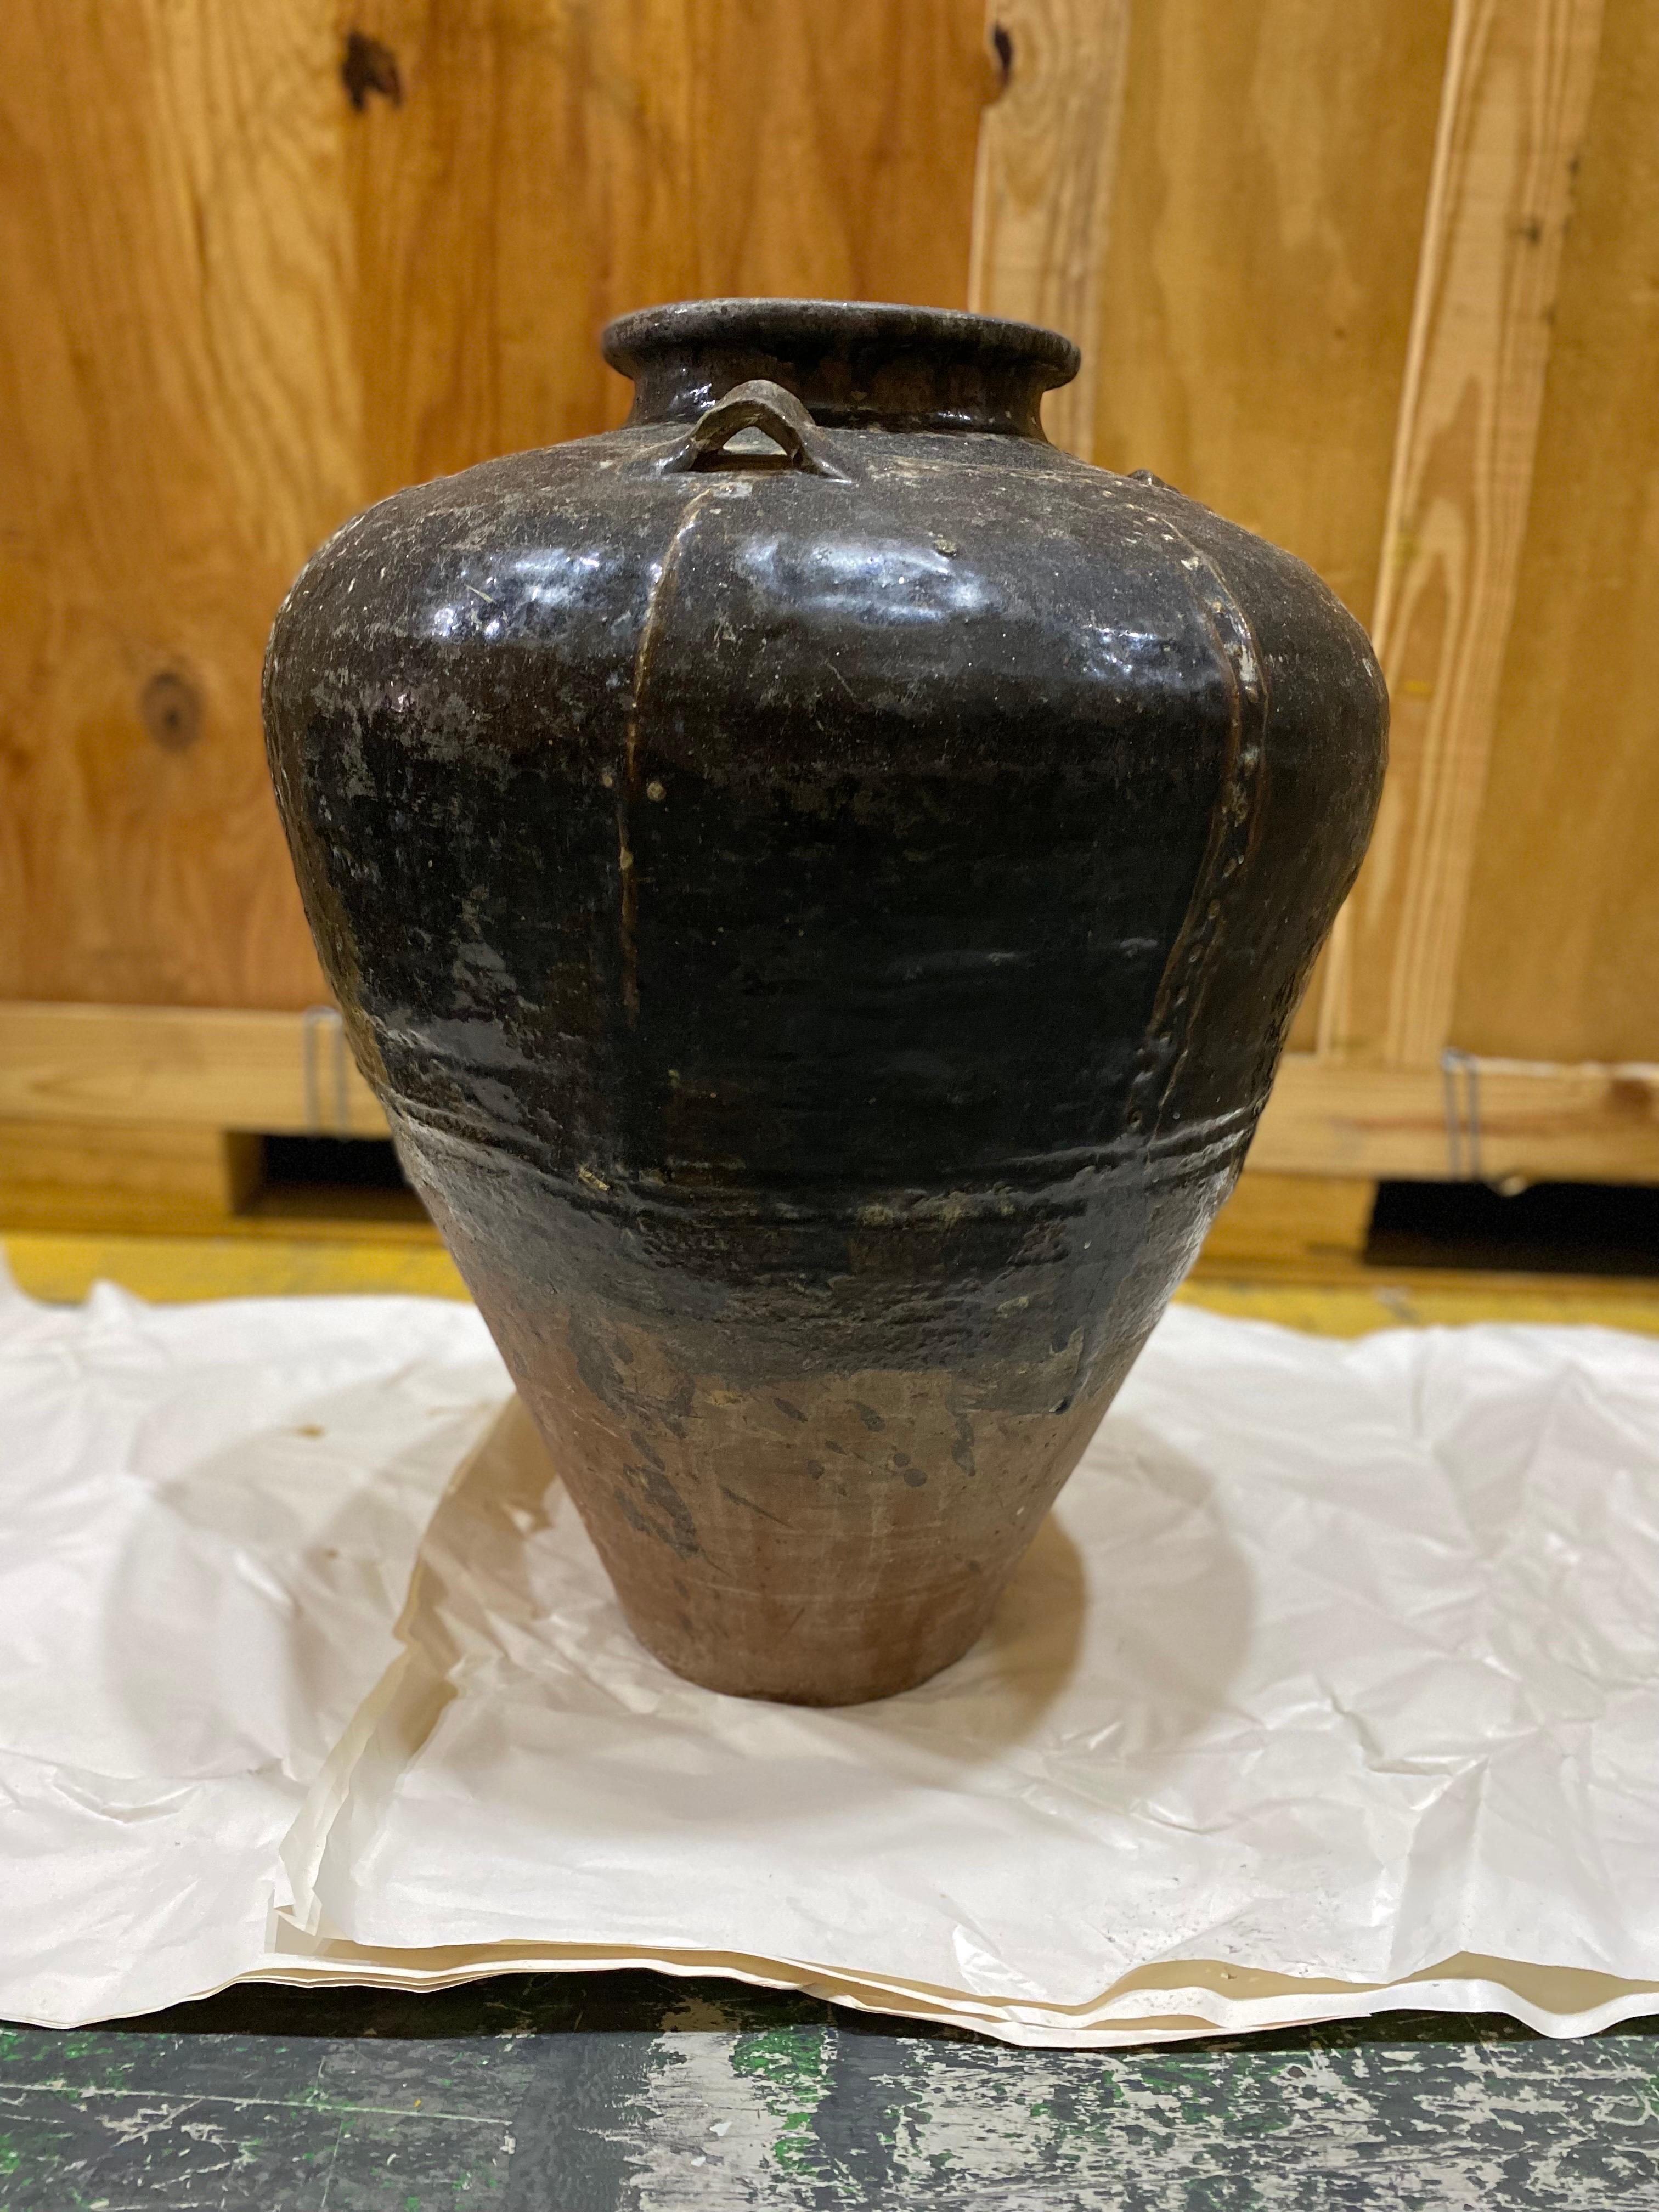 One Large 19th C. Japanese Brown Glazed Terracotta pot
A dark glaze over partially unglazed terracotta. An interesting and unusual design which looks like Japanese metalwork. Good overall condition. Some wear to finish consistent with age. 

19''